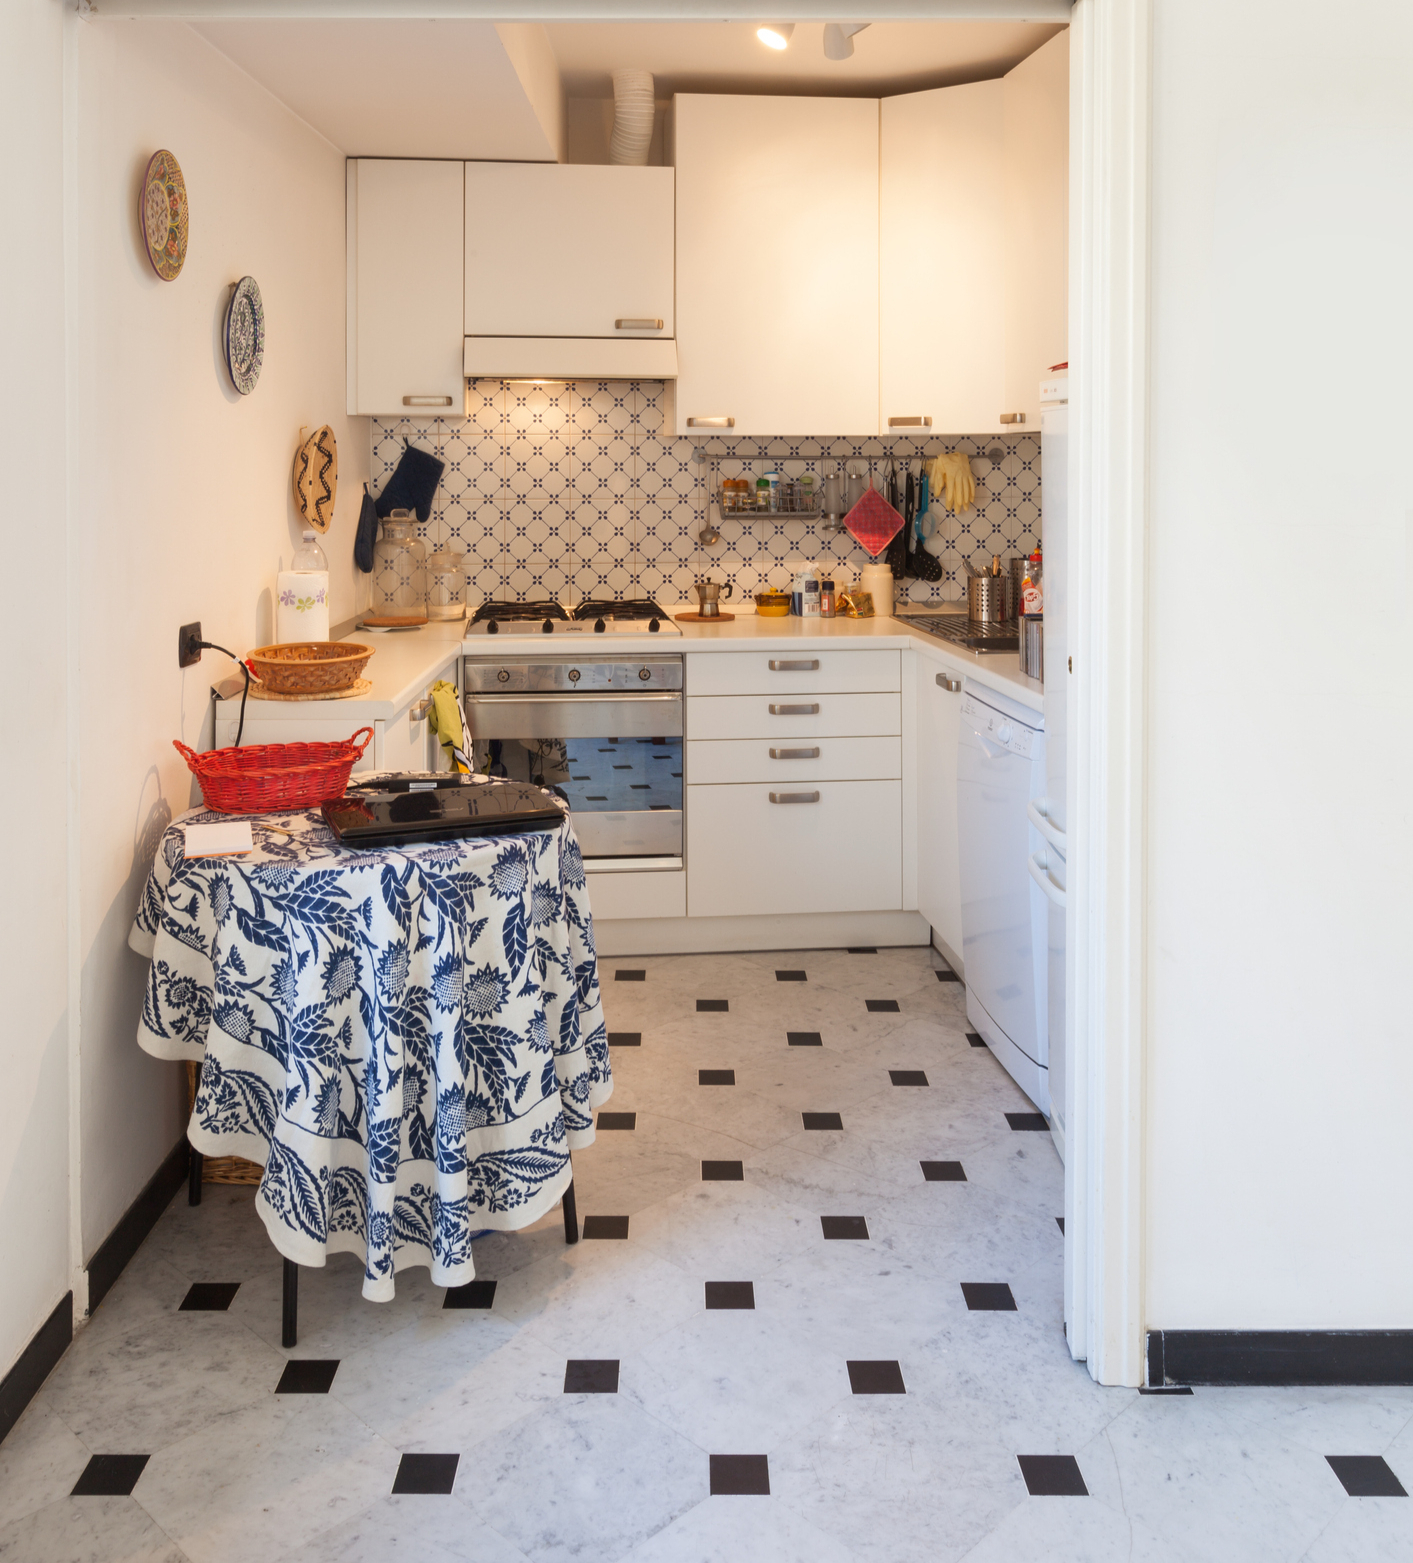 Enhance small kitchens with unique tile patterns for backsplashes and floors.